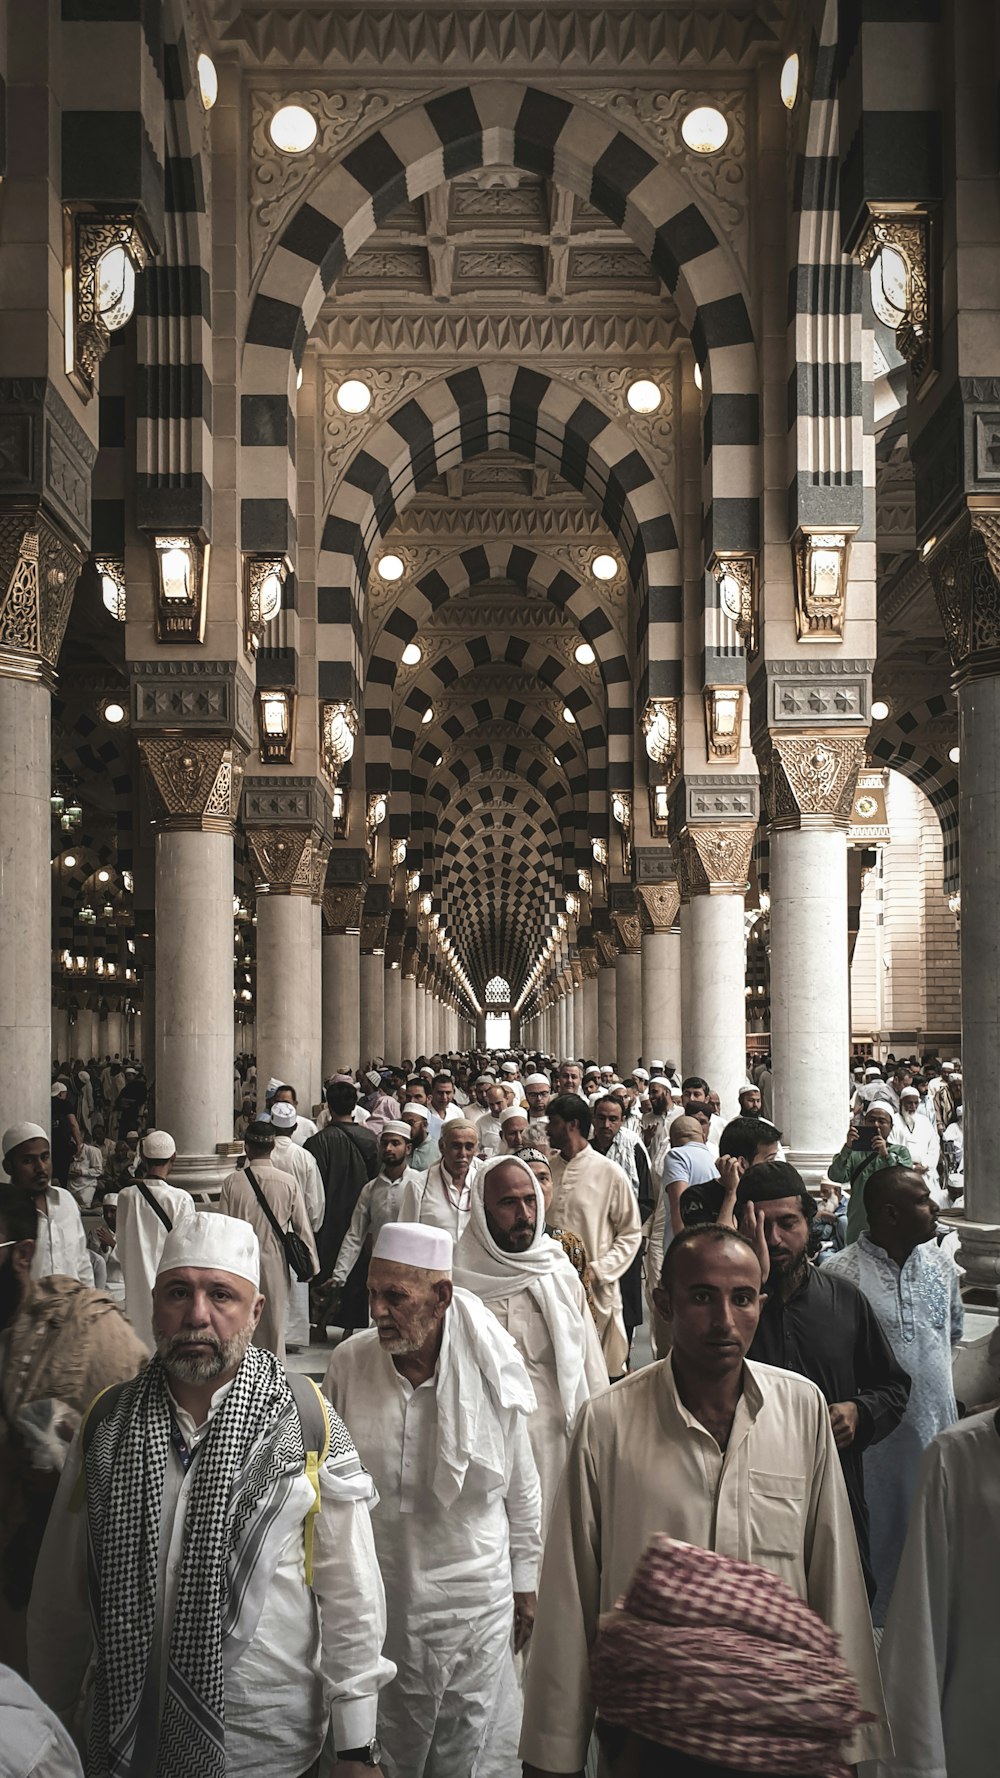 Nabawi Mosque Pictures Download Free Images On Unsplash